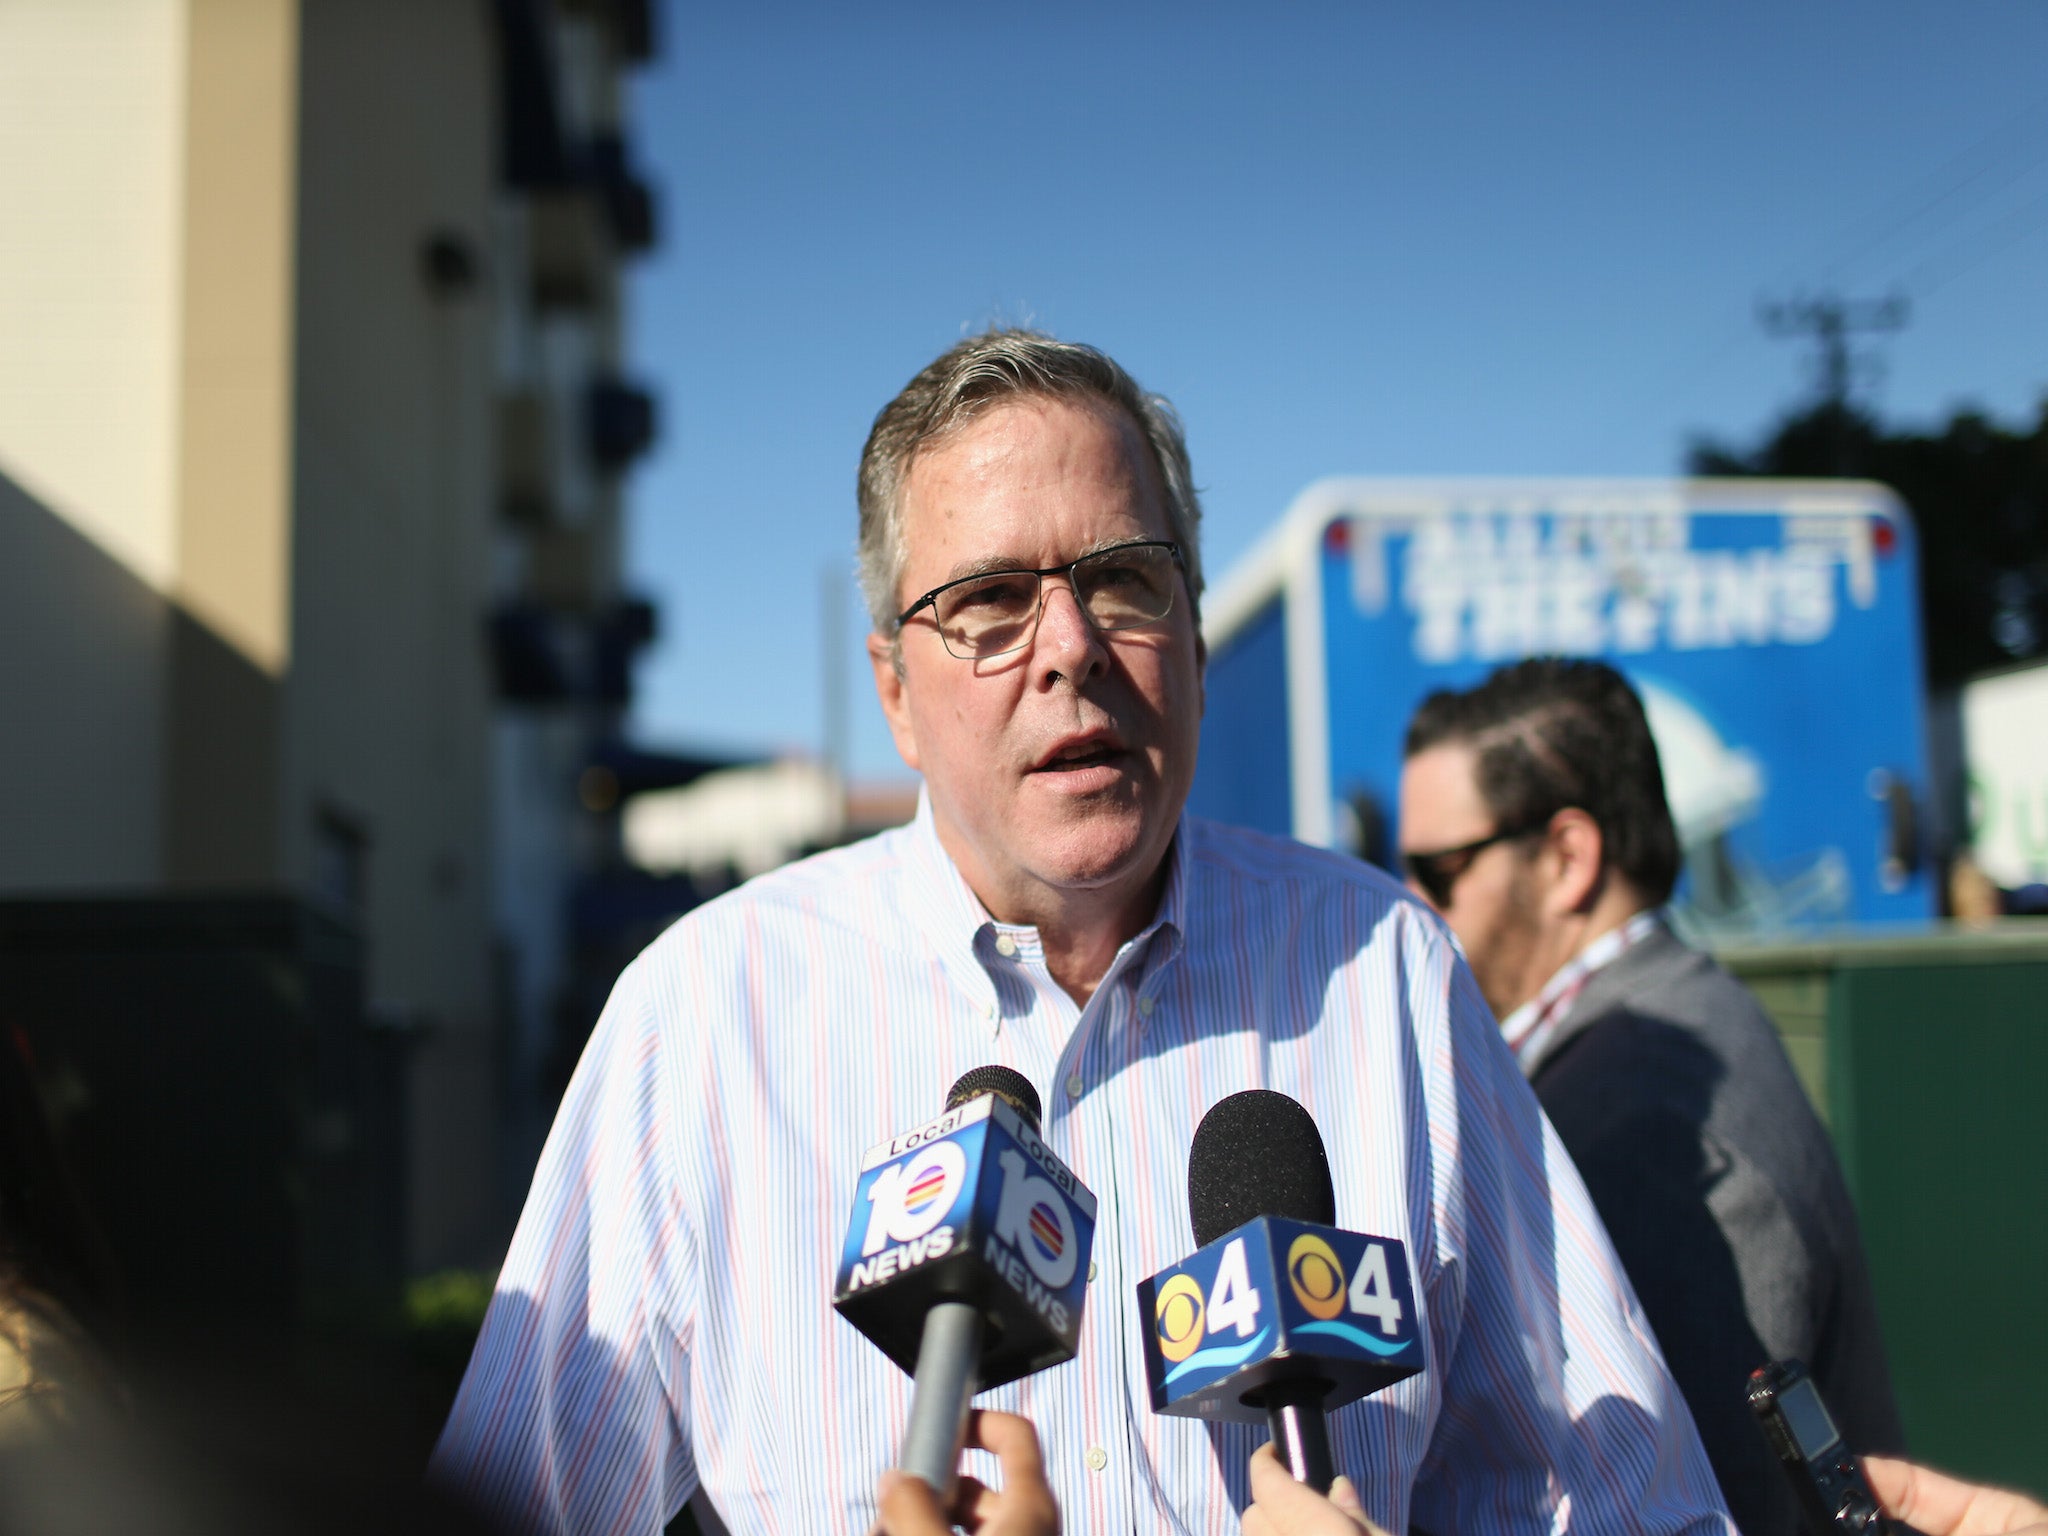 Former Florida Governor Jeb Bush says he is 'actively considering' a run for the White House